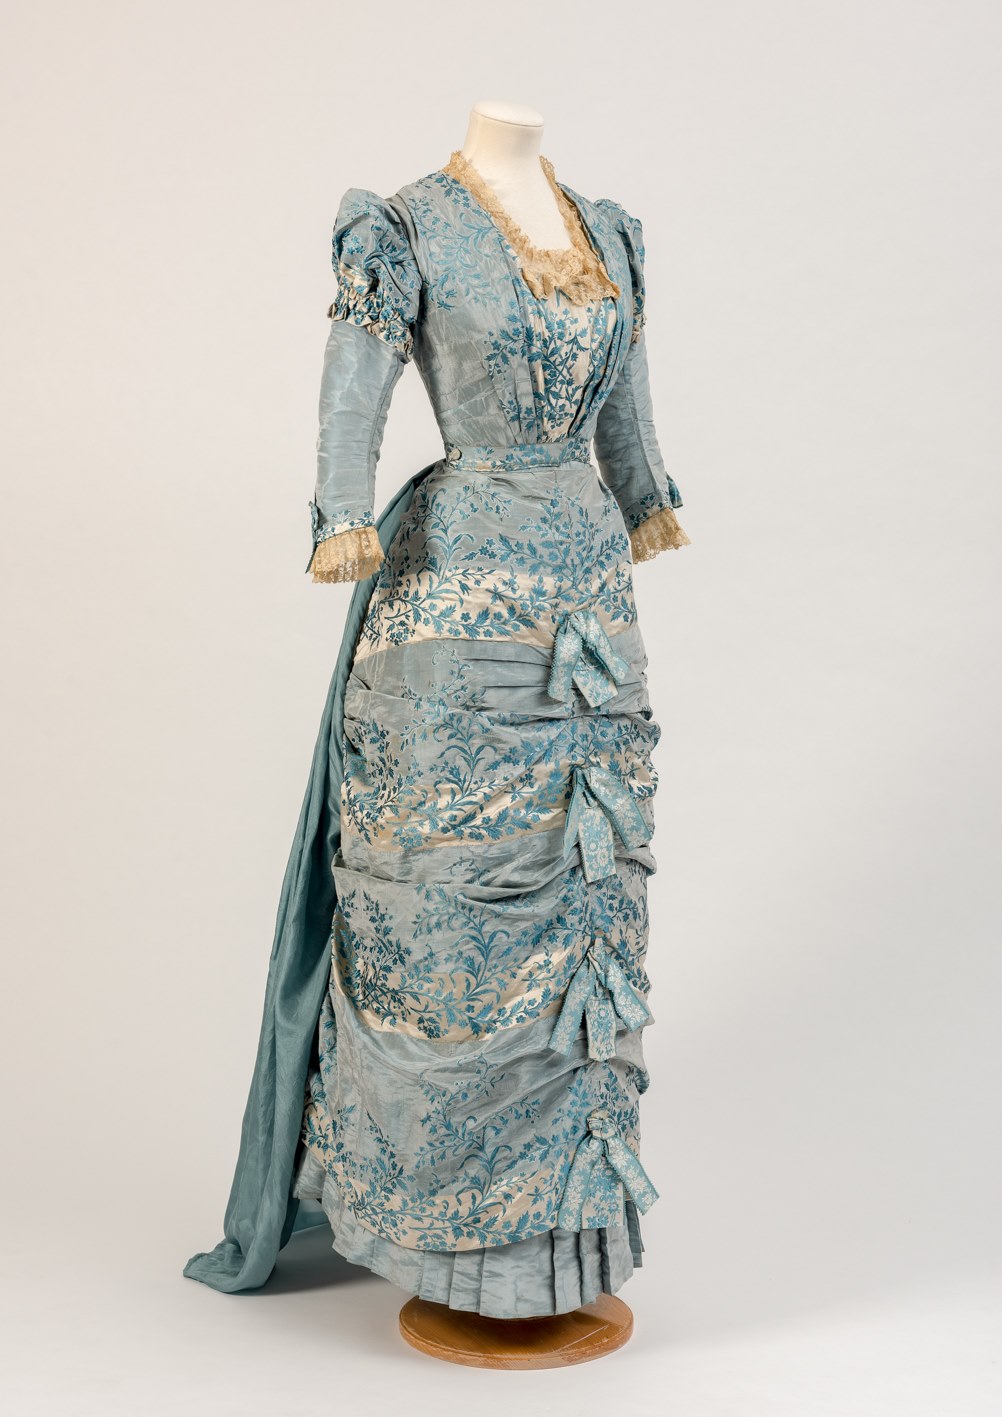 Dress in two parts, 1880s, Fashion Museum Bath